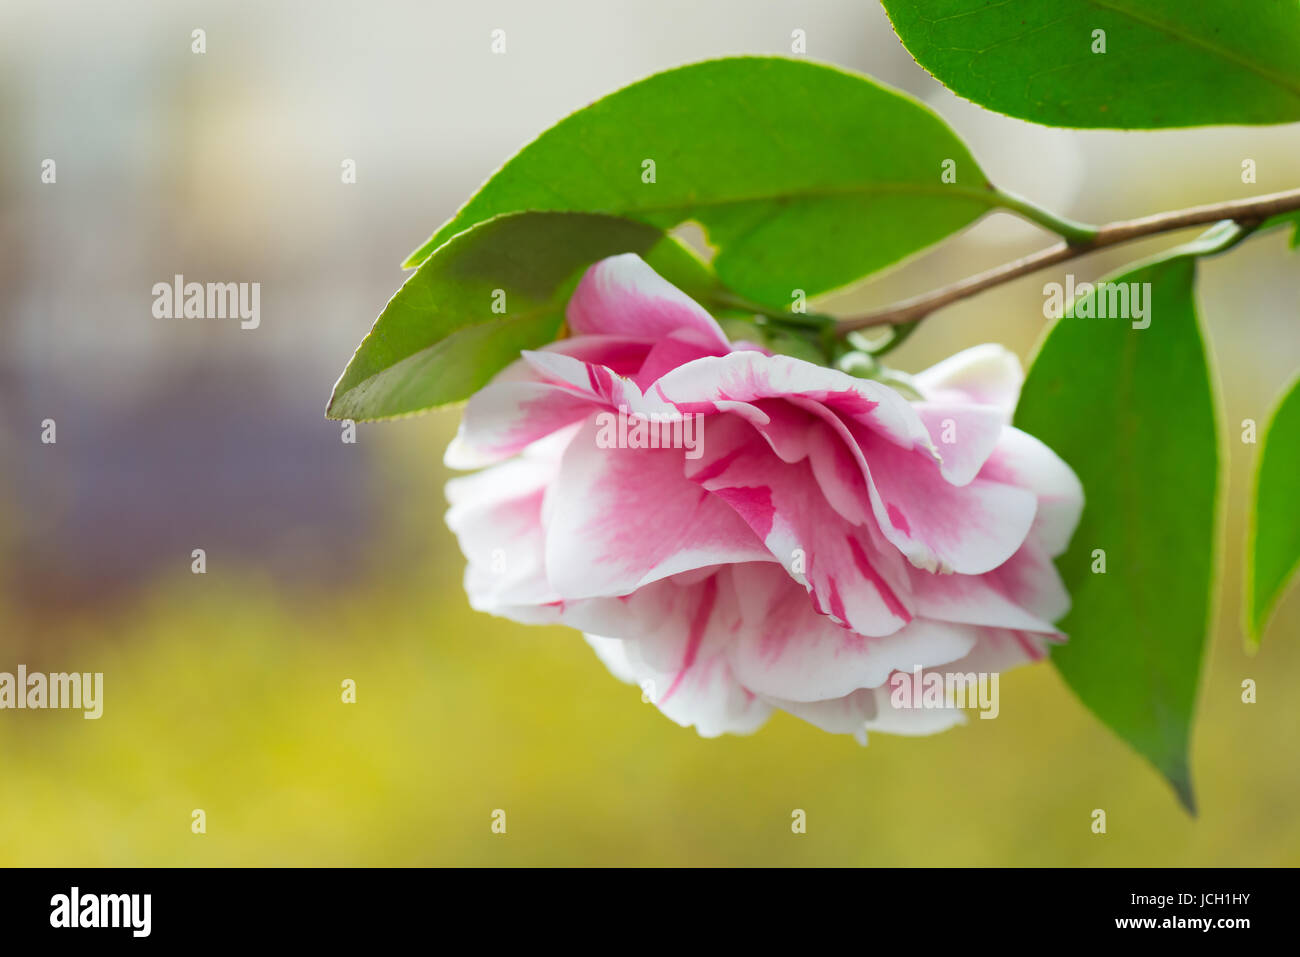 A pink and white, drooping, evergreen Camellia (Camellia japonica) set against a softly blurred background. Georgia, United States, North America. Stock Photo